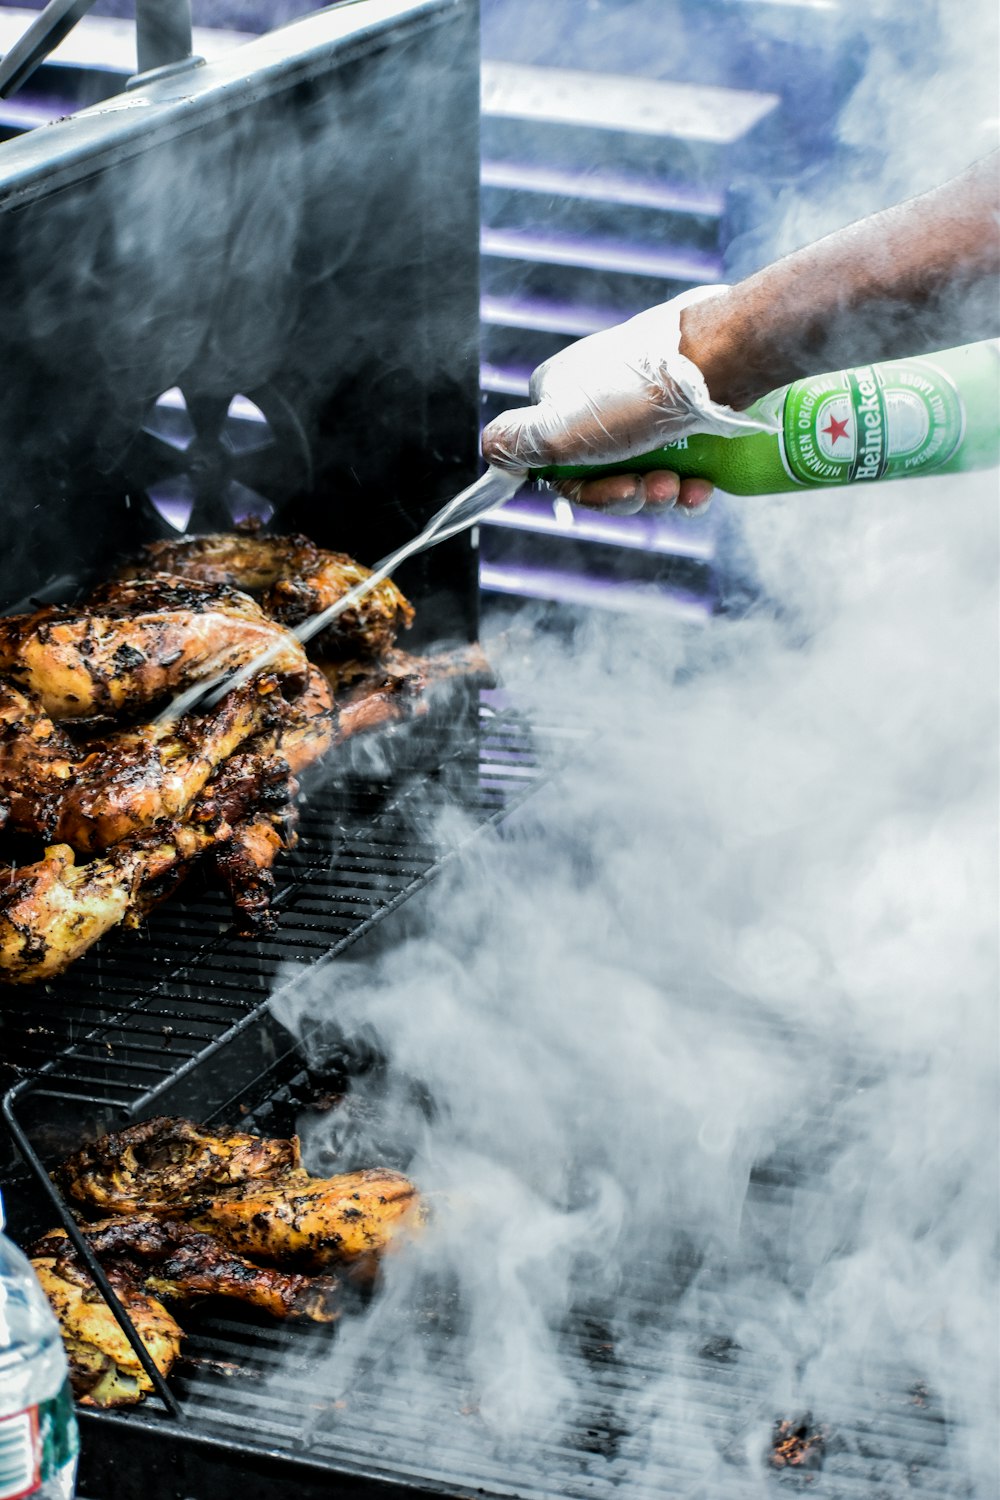 person holding green bottle and grilled meat